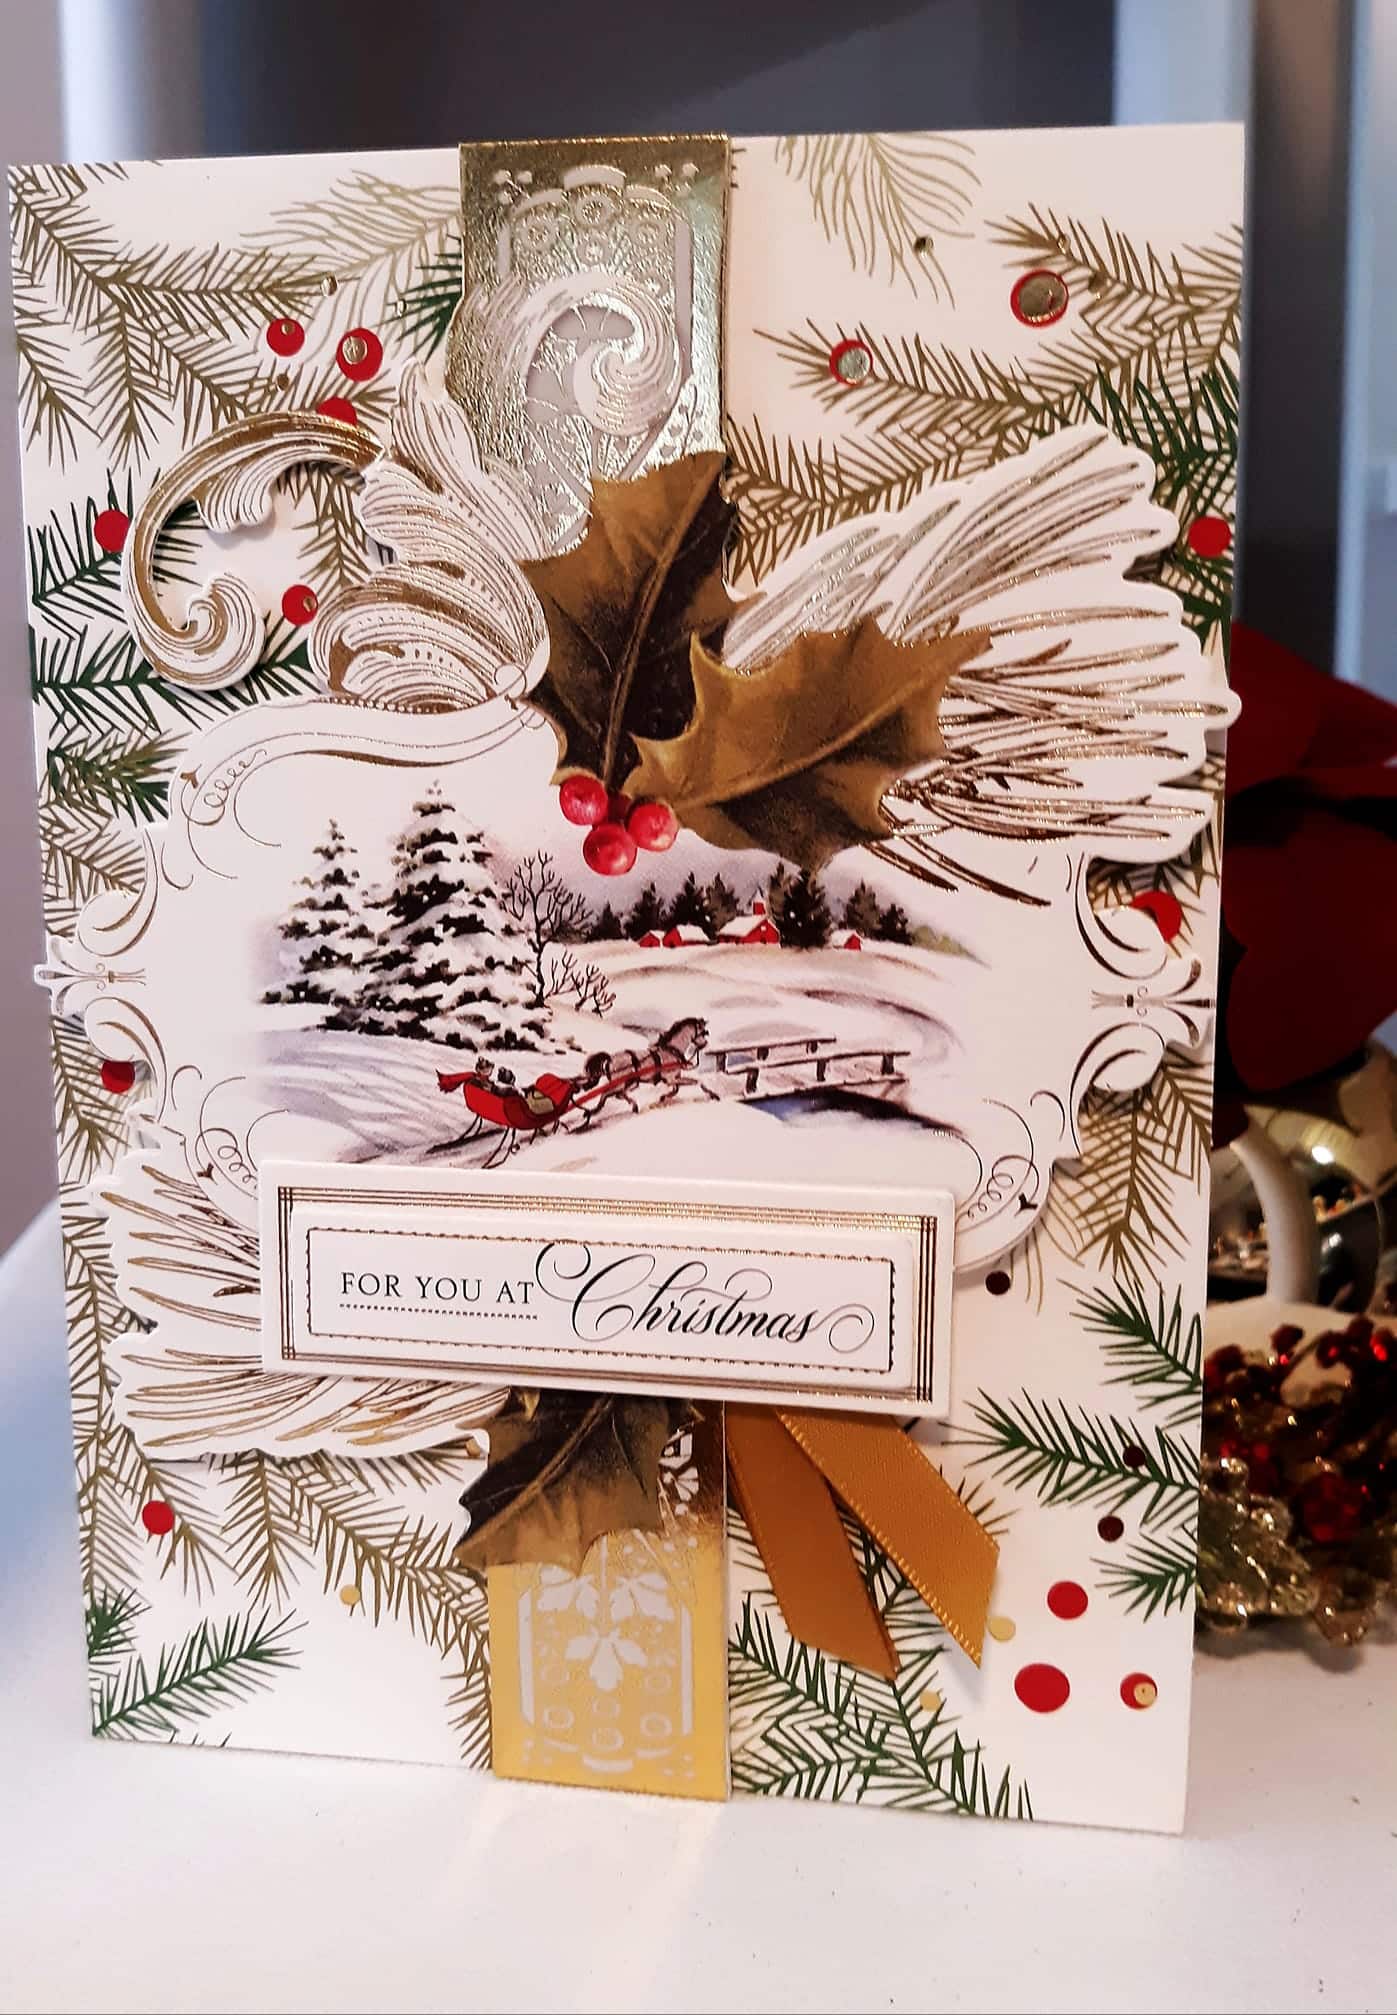 A christmas card with gold and silver decorations.